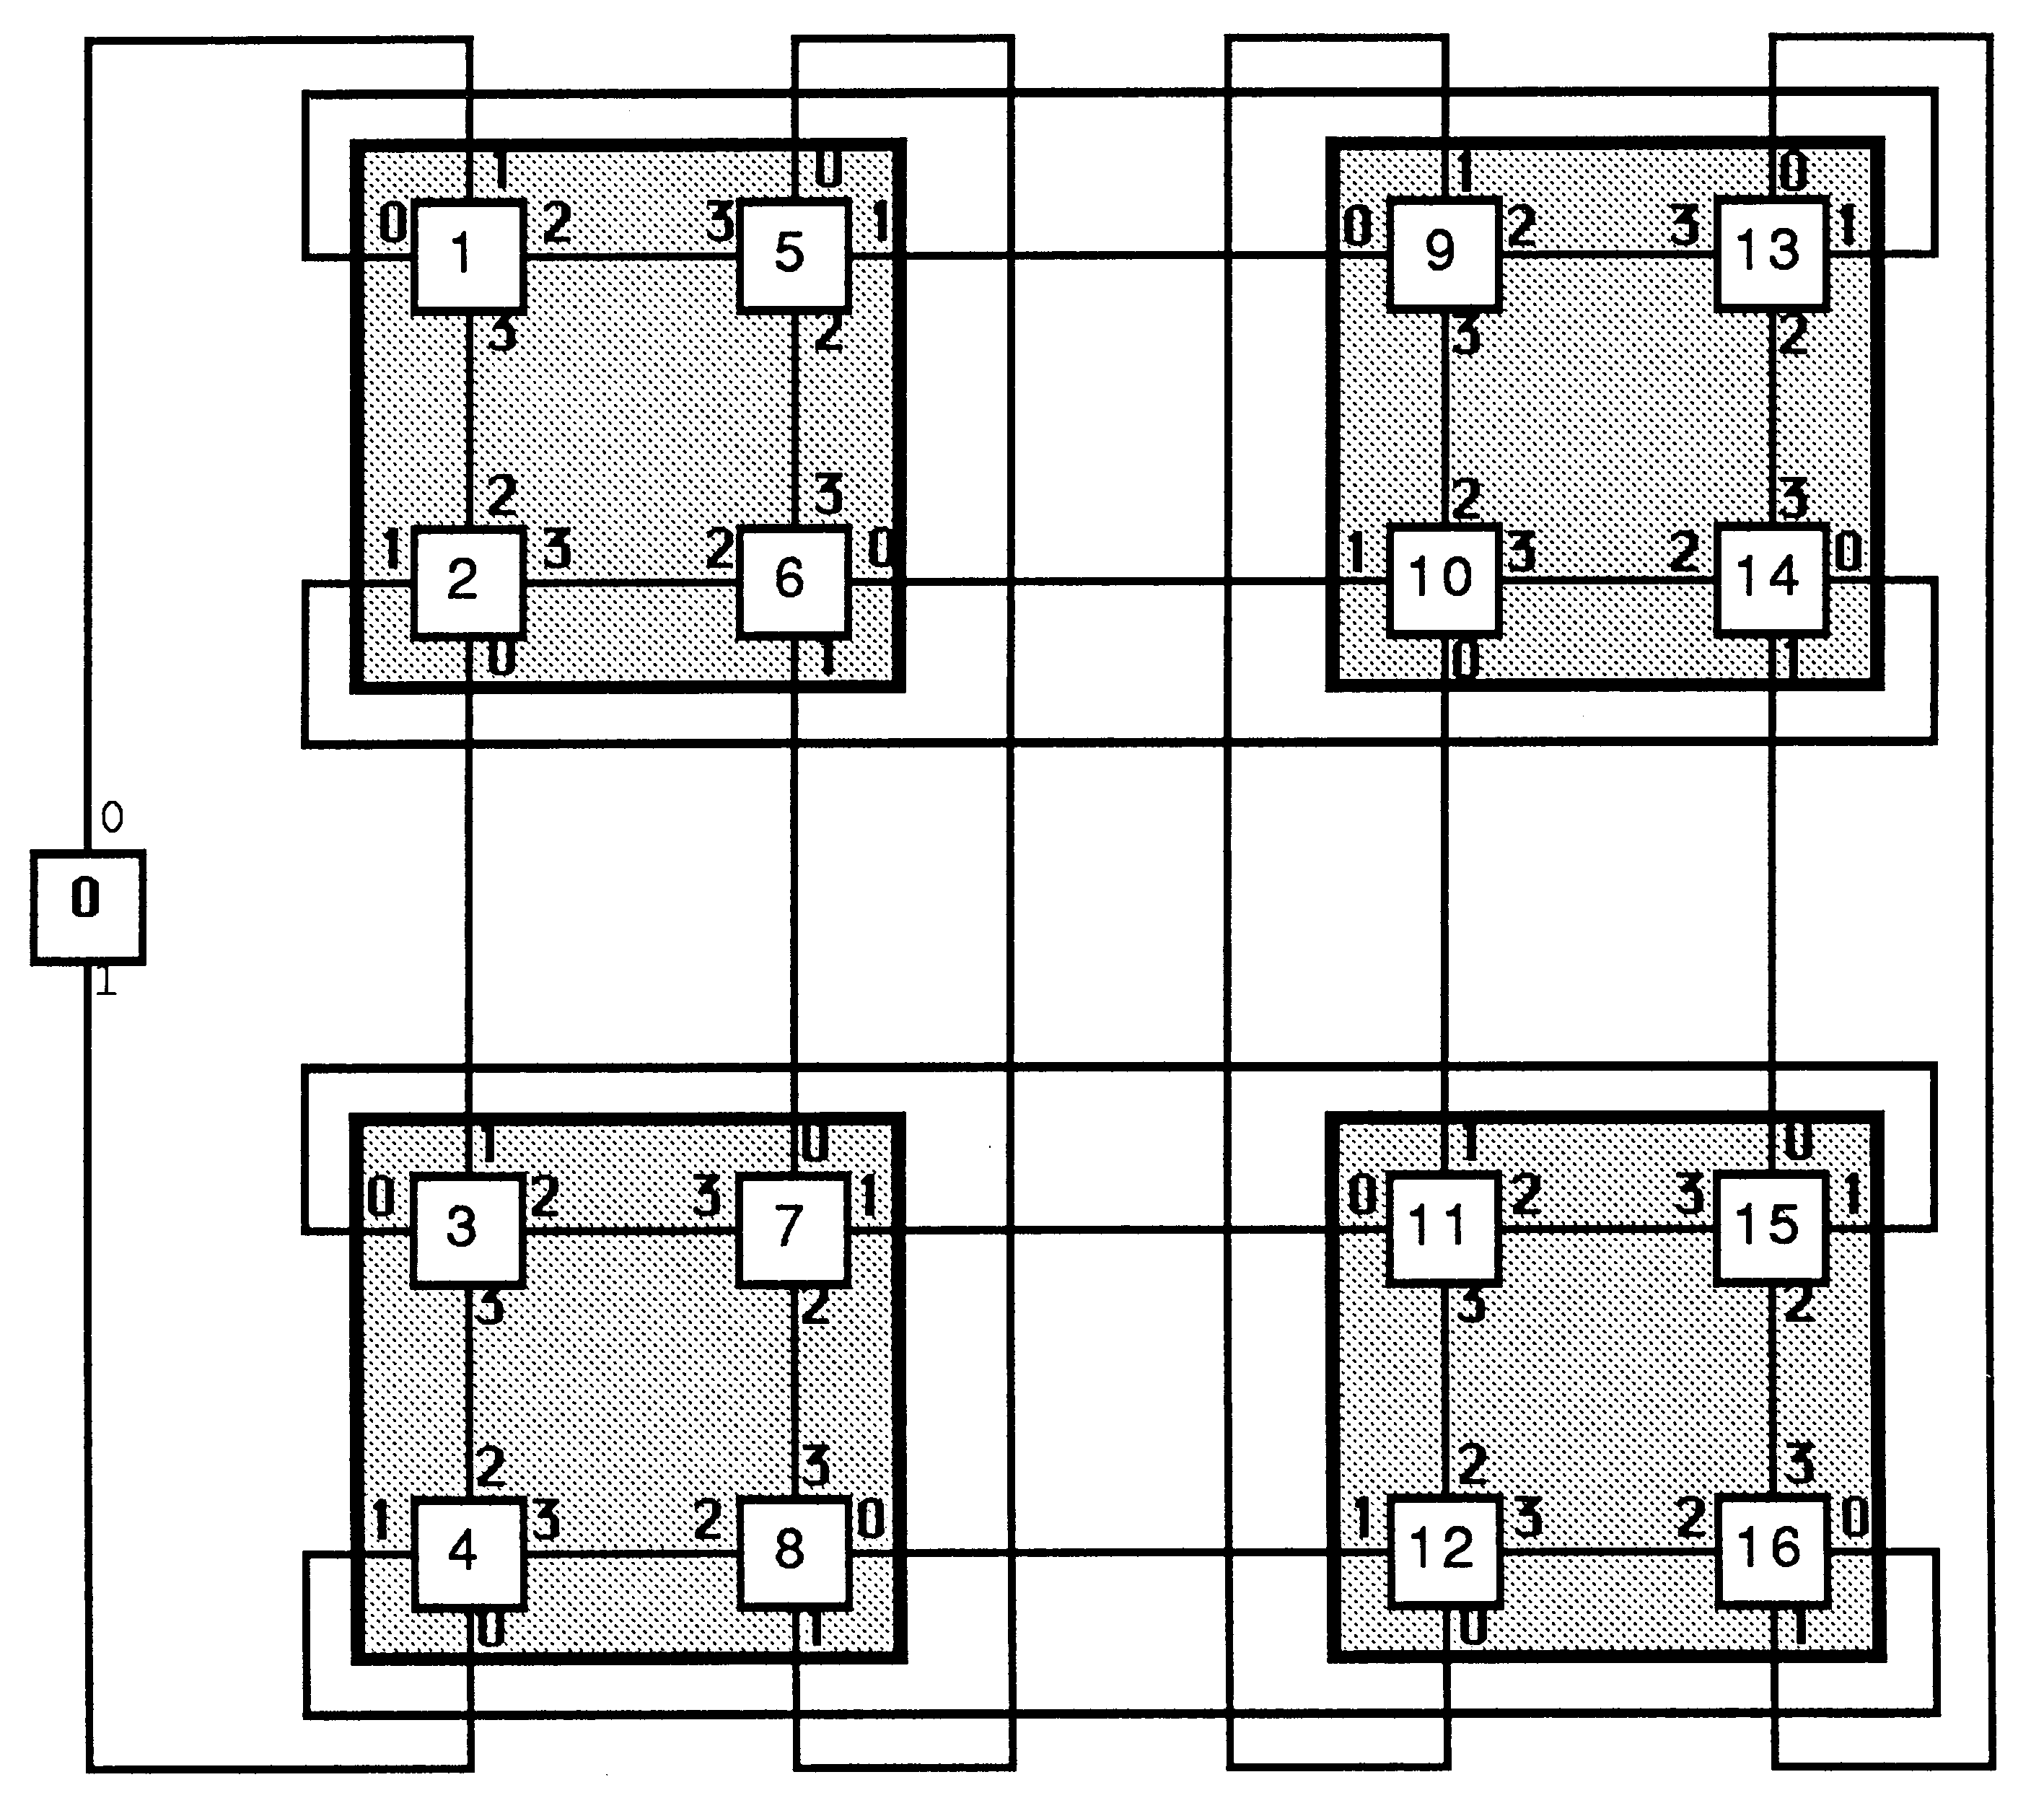 4 X 4
two-dimensional array (with extra node for booting)